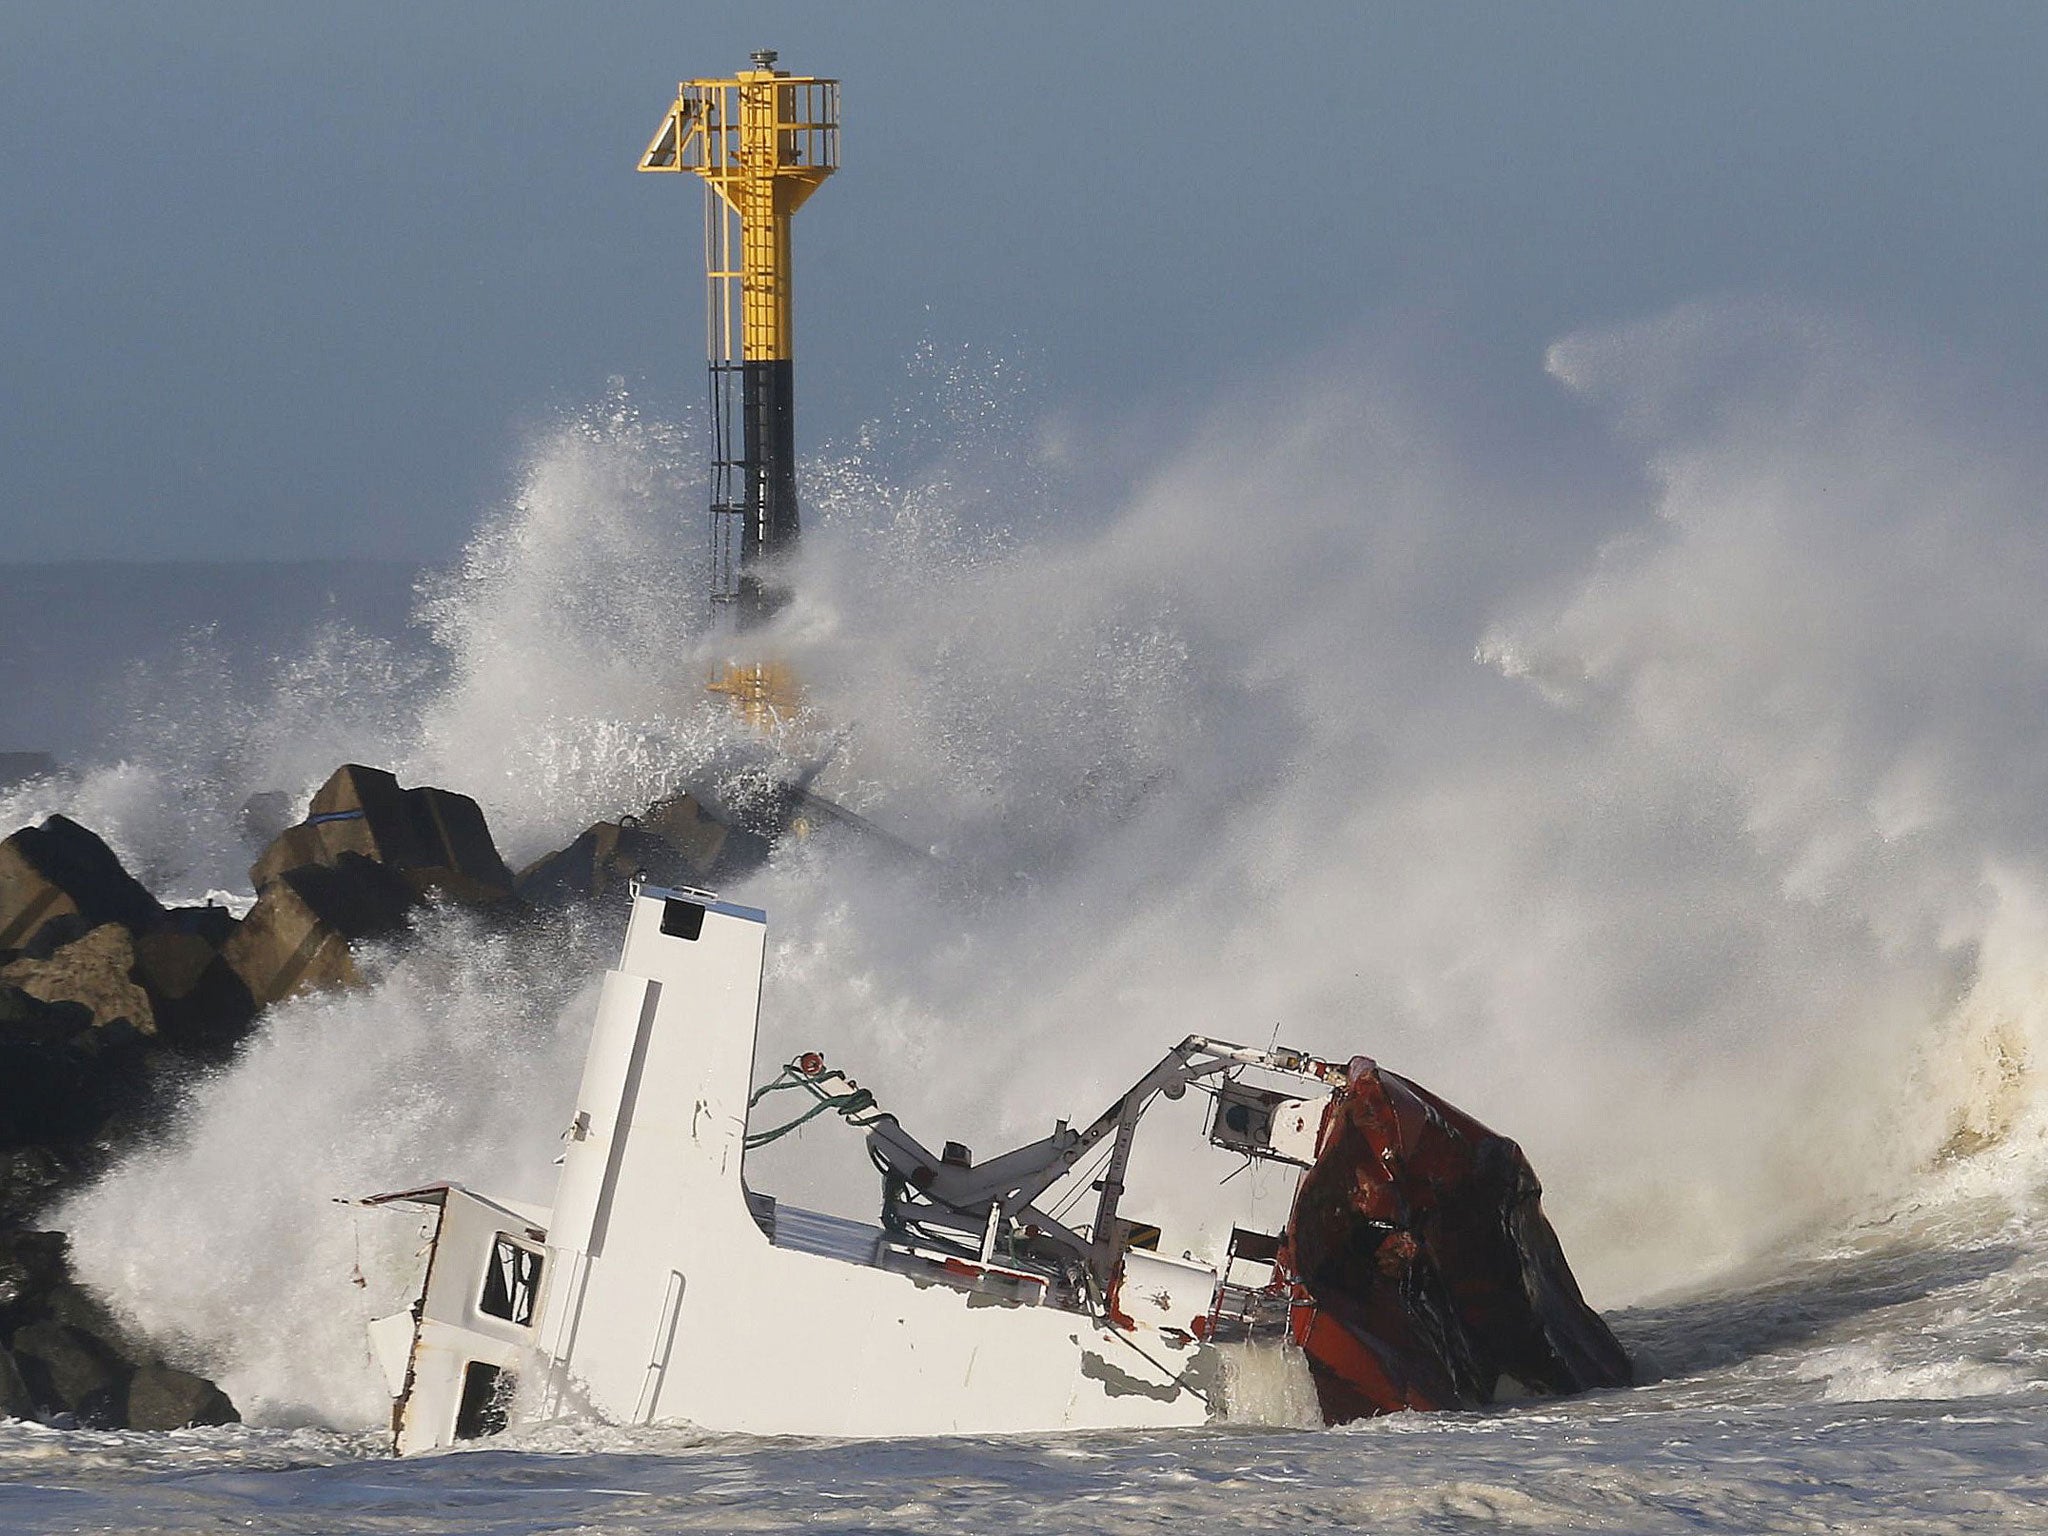 Waves are seen breaking against the Spanish cargo ship "Luno" the day after it broke in two on a seawall off the beach in Anglet on the Atlantic Coast of France